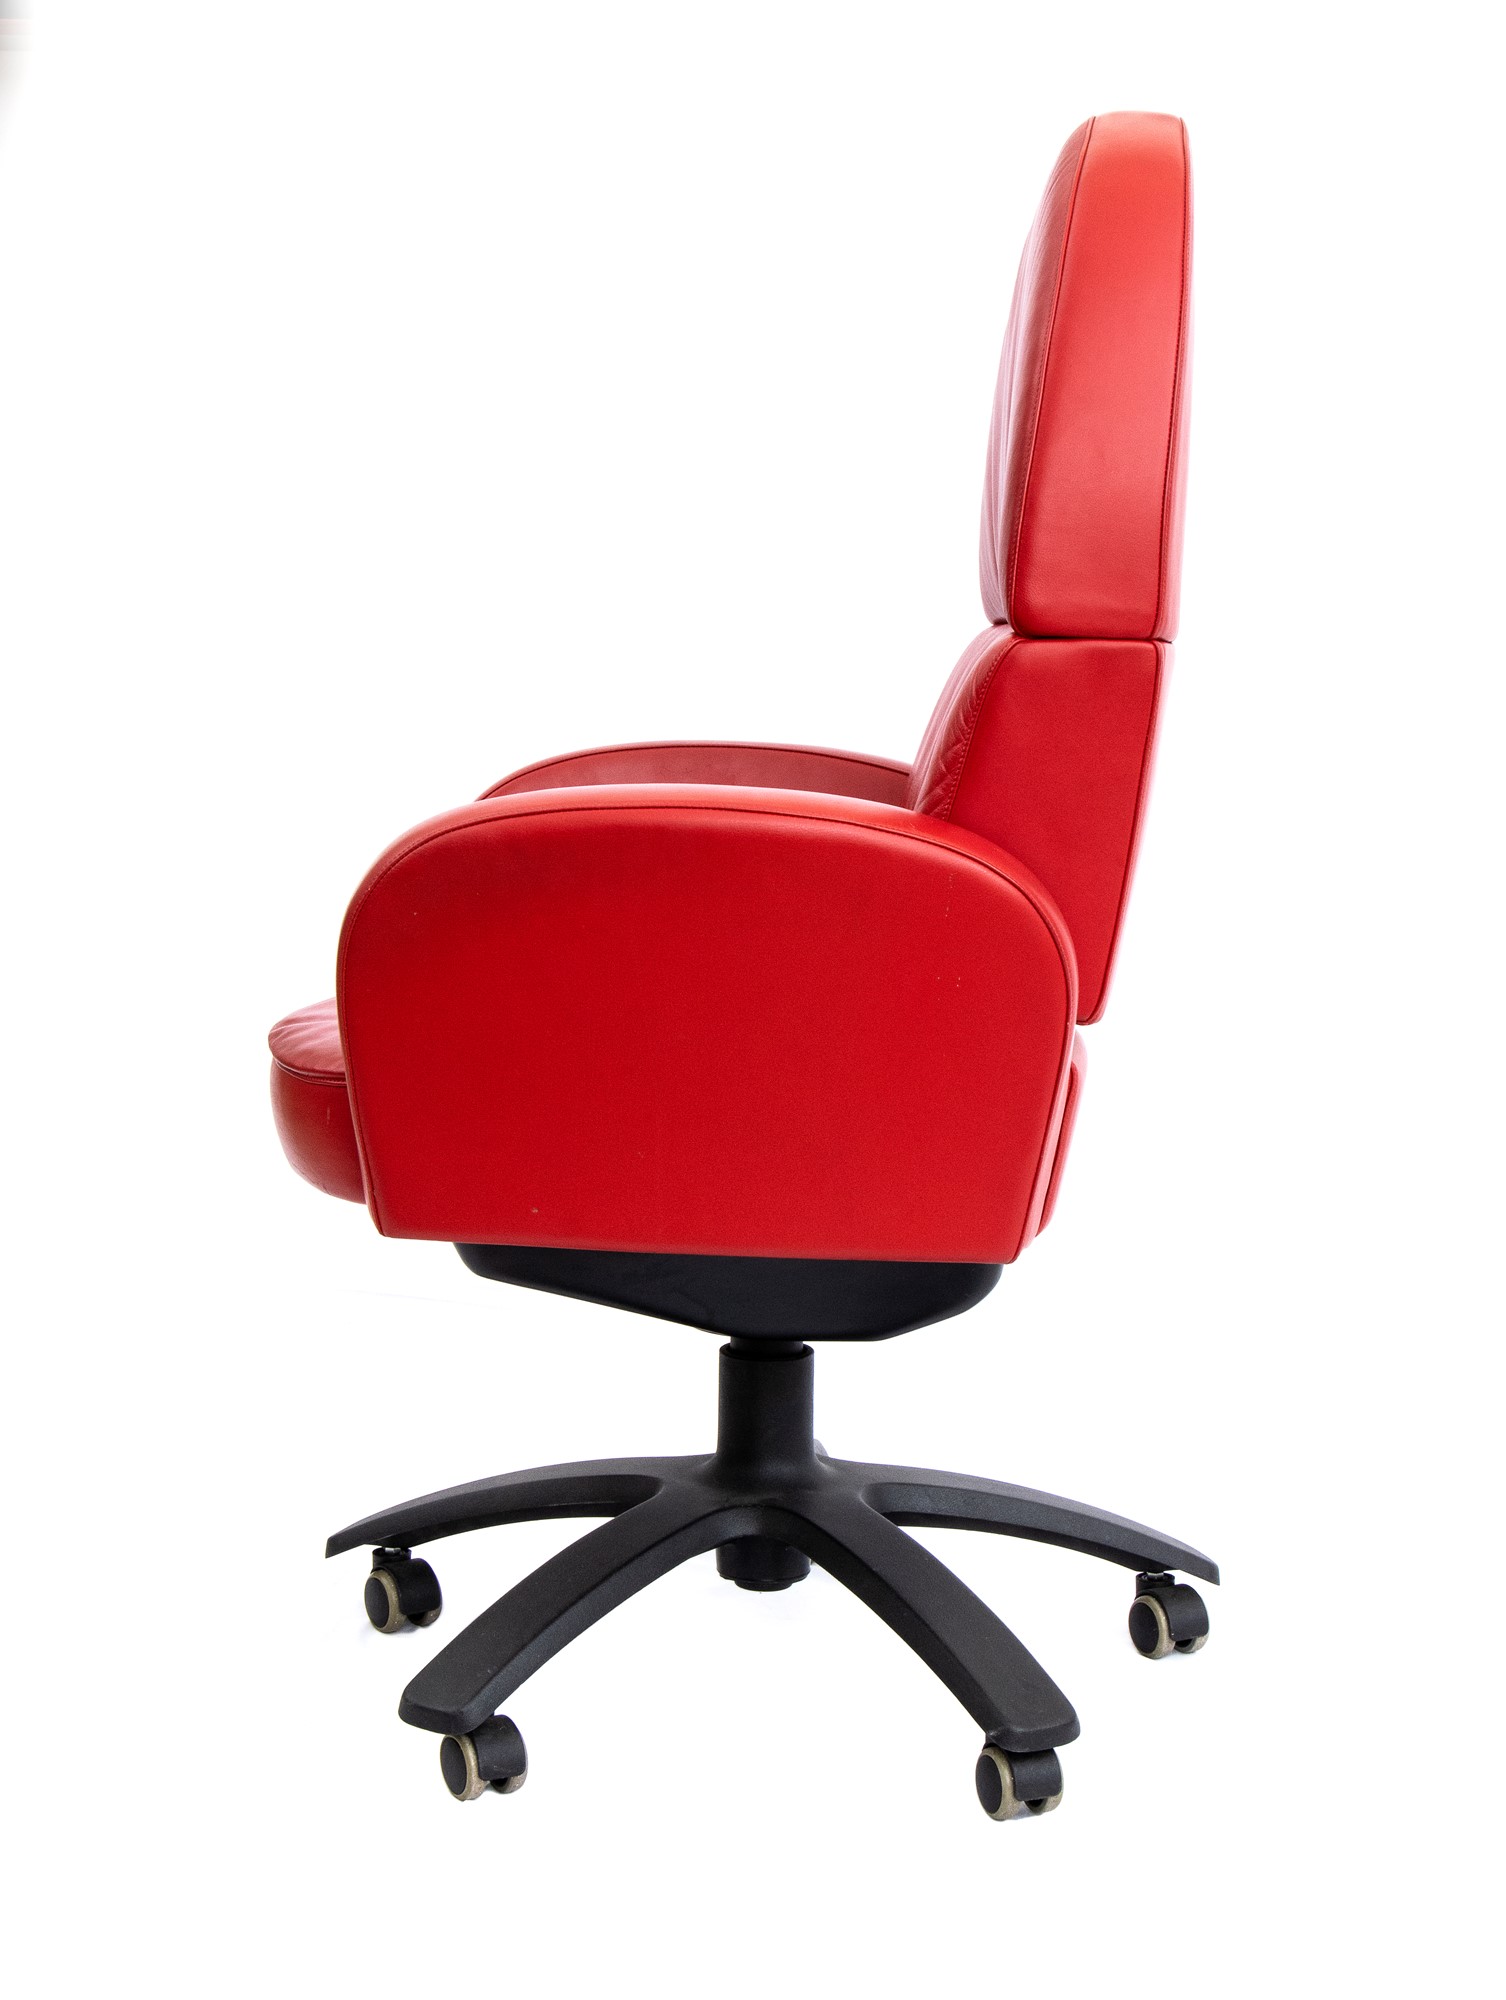 Paolo Pininfarina Torino 1958-Torino 2024 Lot of 5 Ego armchairs and Ego President executive chair - Image 23 of 29